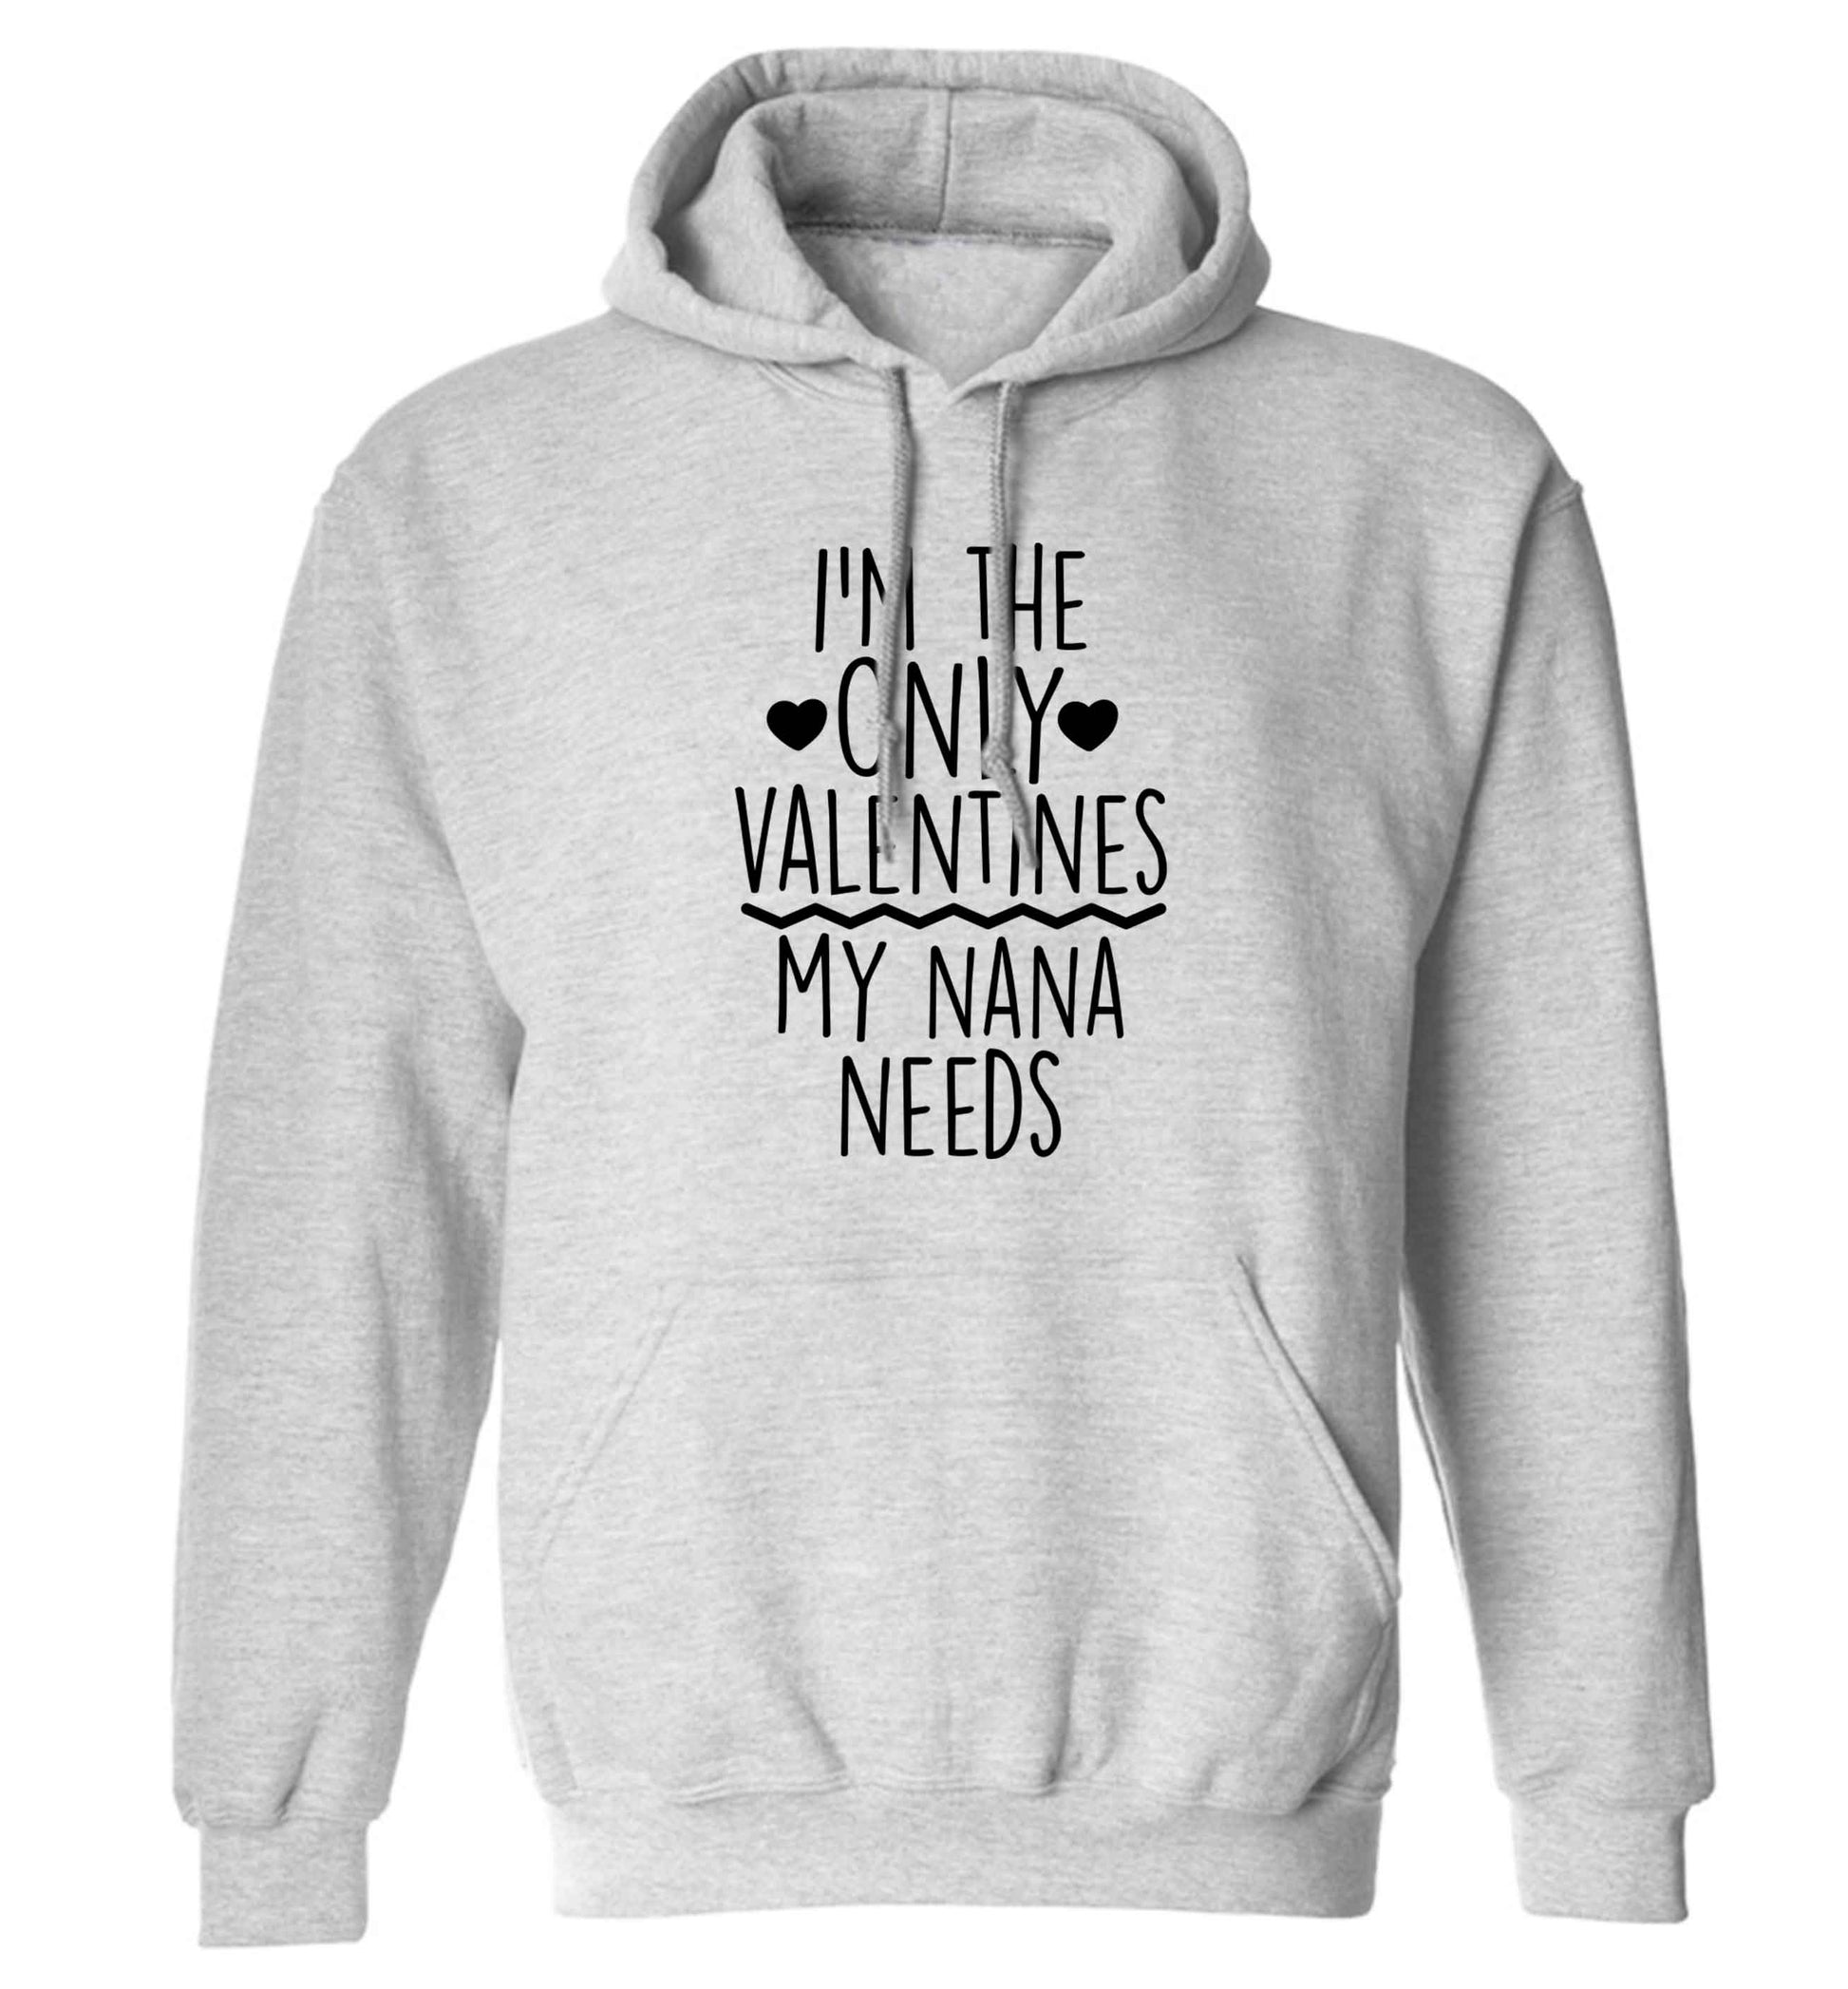 I'm the only valentines my nana needs adults unisex grey hoodie 2XL